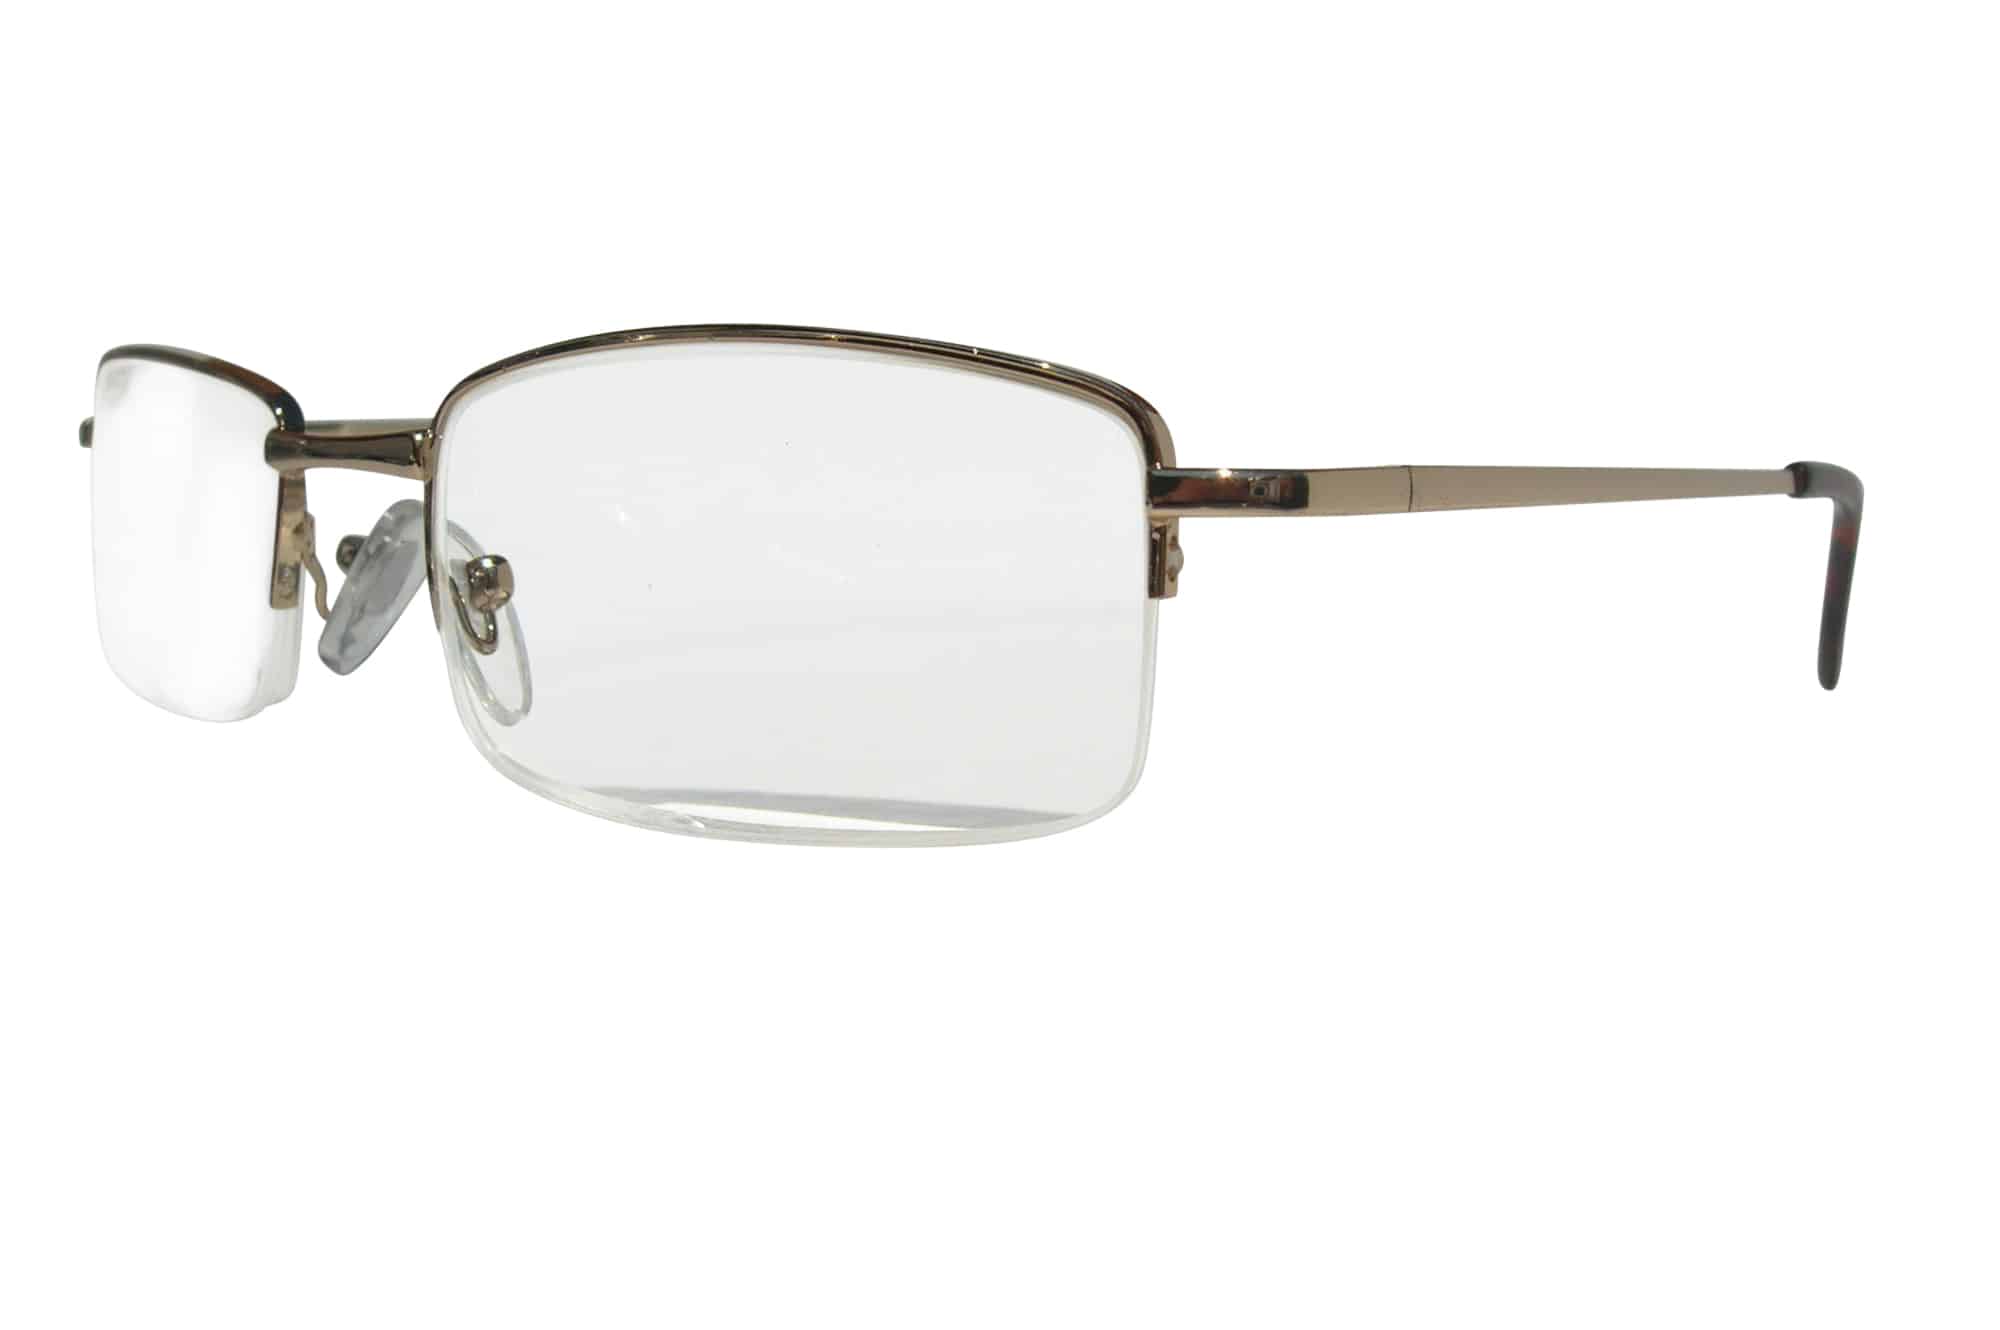 Cambridge Extra Strength Reading Glasses in Gold